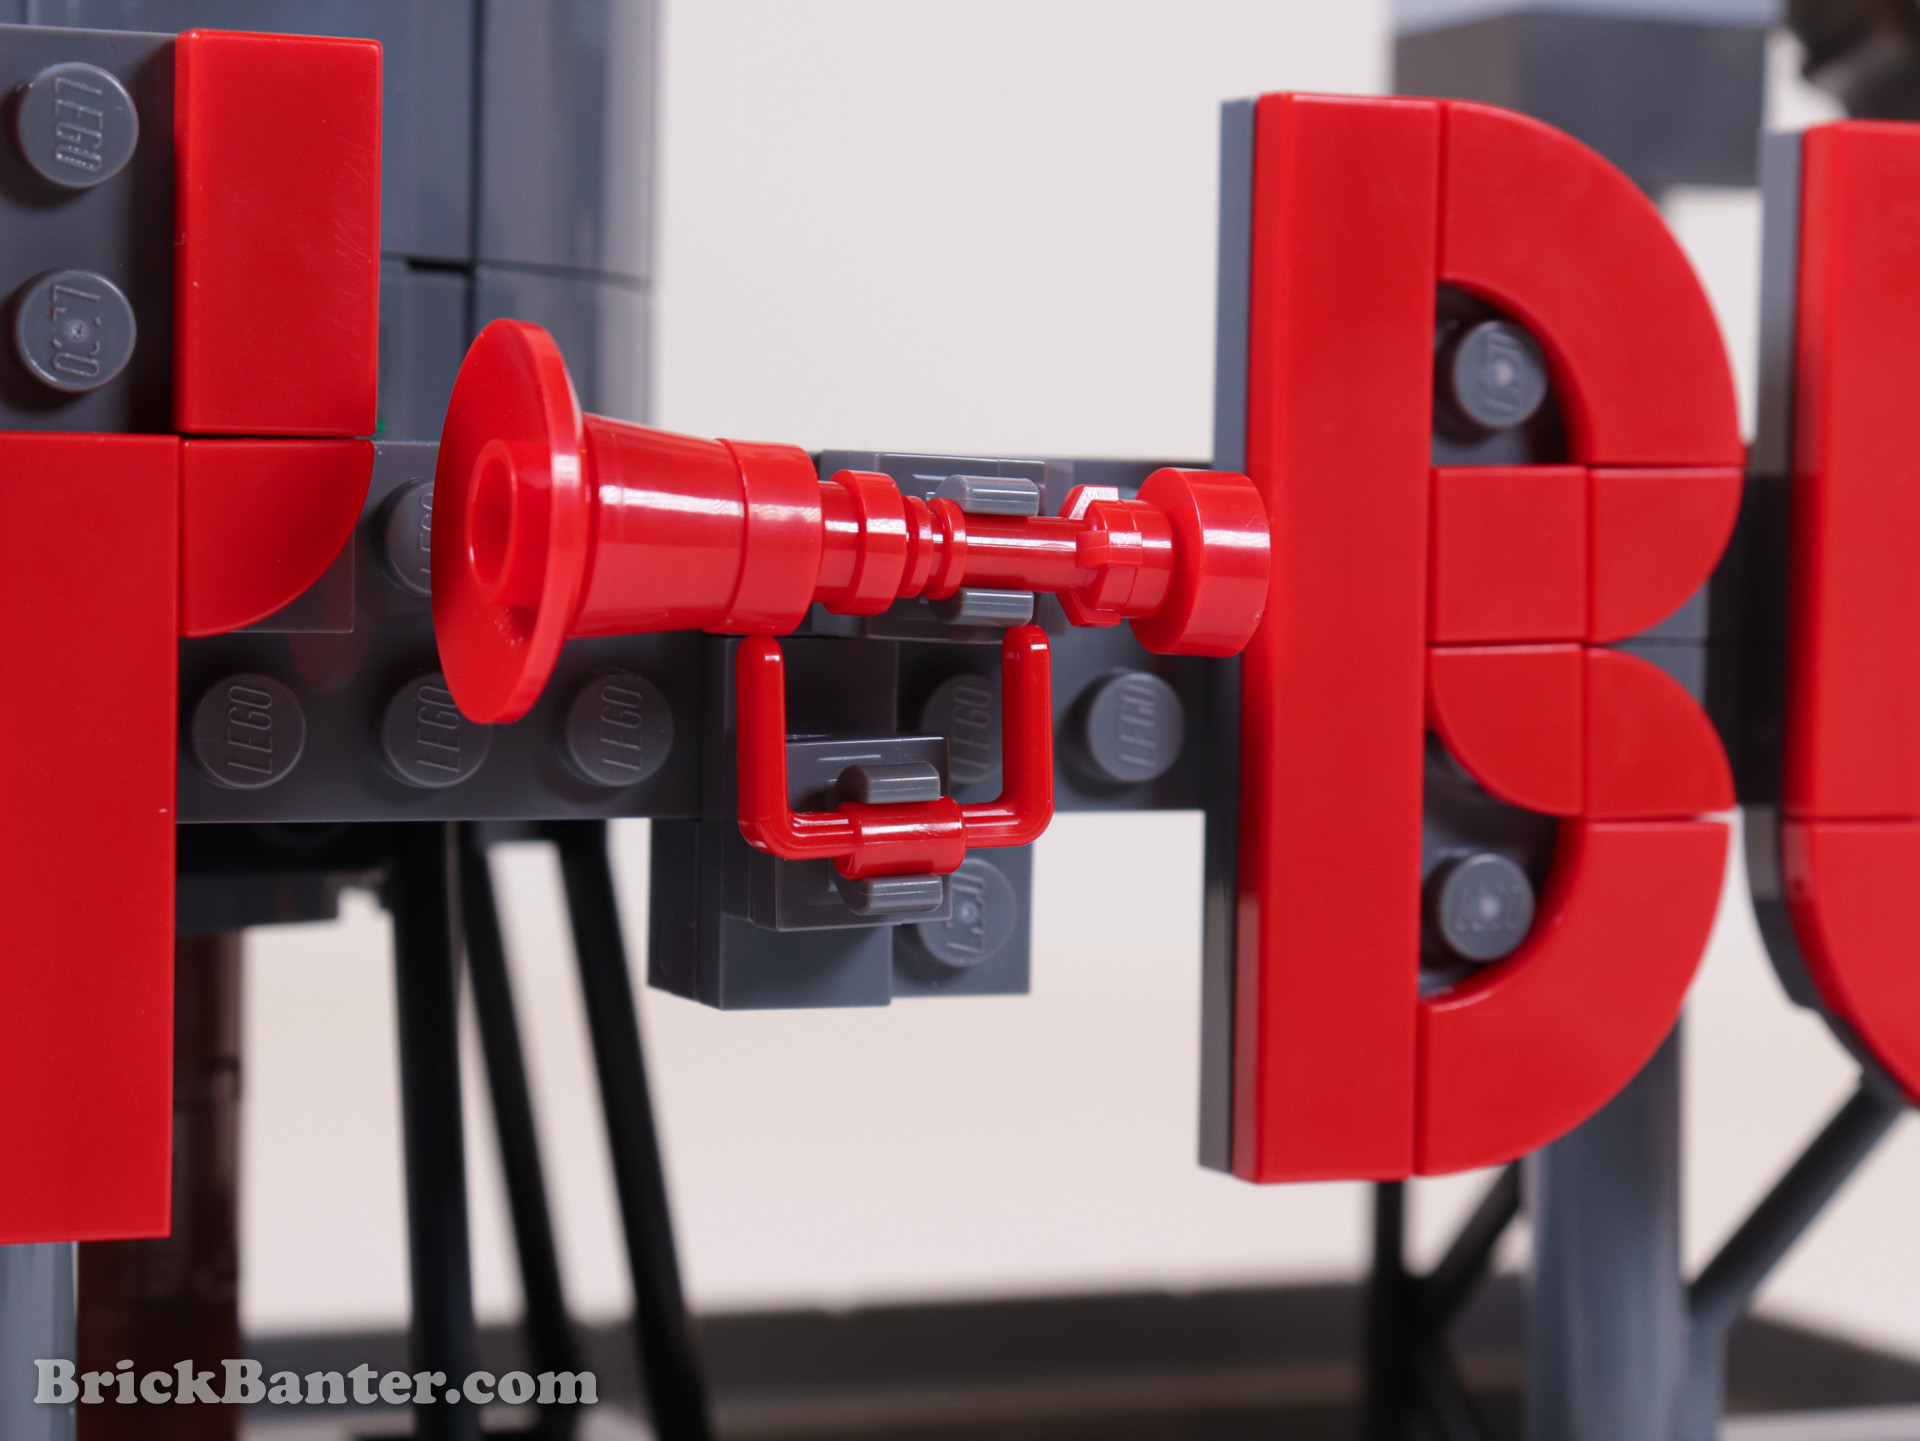 LEGO 76178 – Daily Bugle          - All the nice part usage seen in this huge set!